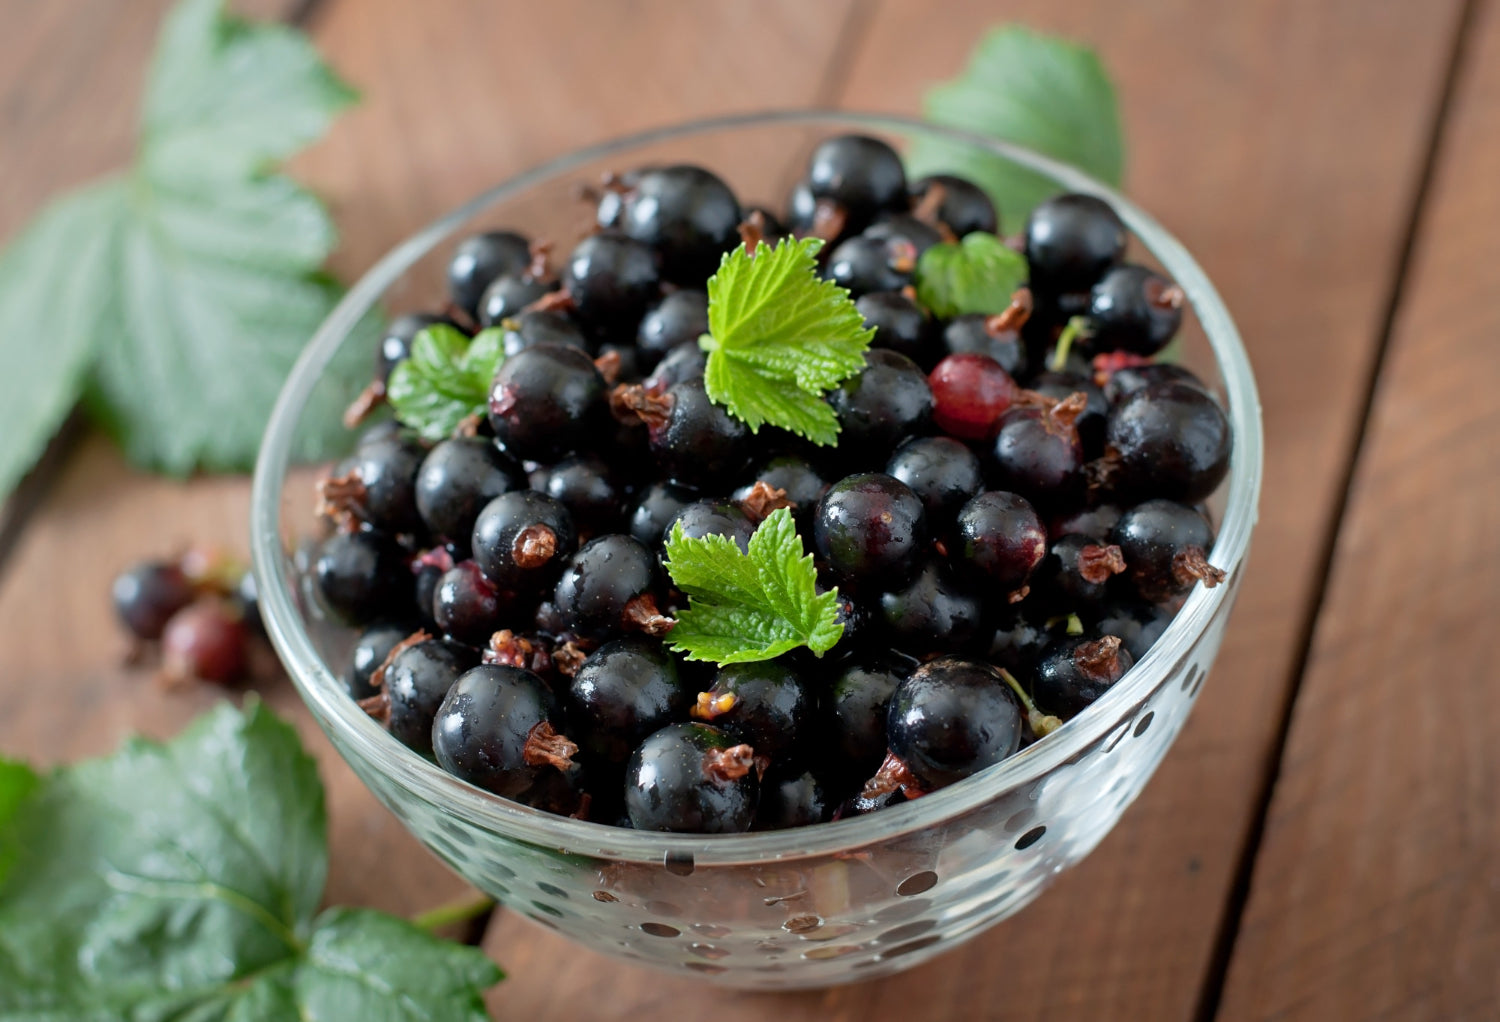 NZ blackcurrants are the ultimate natural supplement for performance and recovery